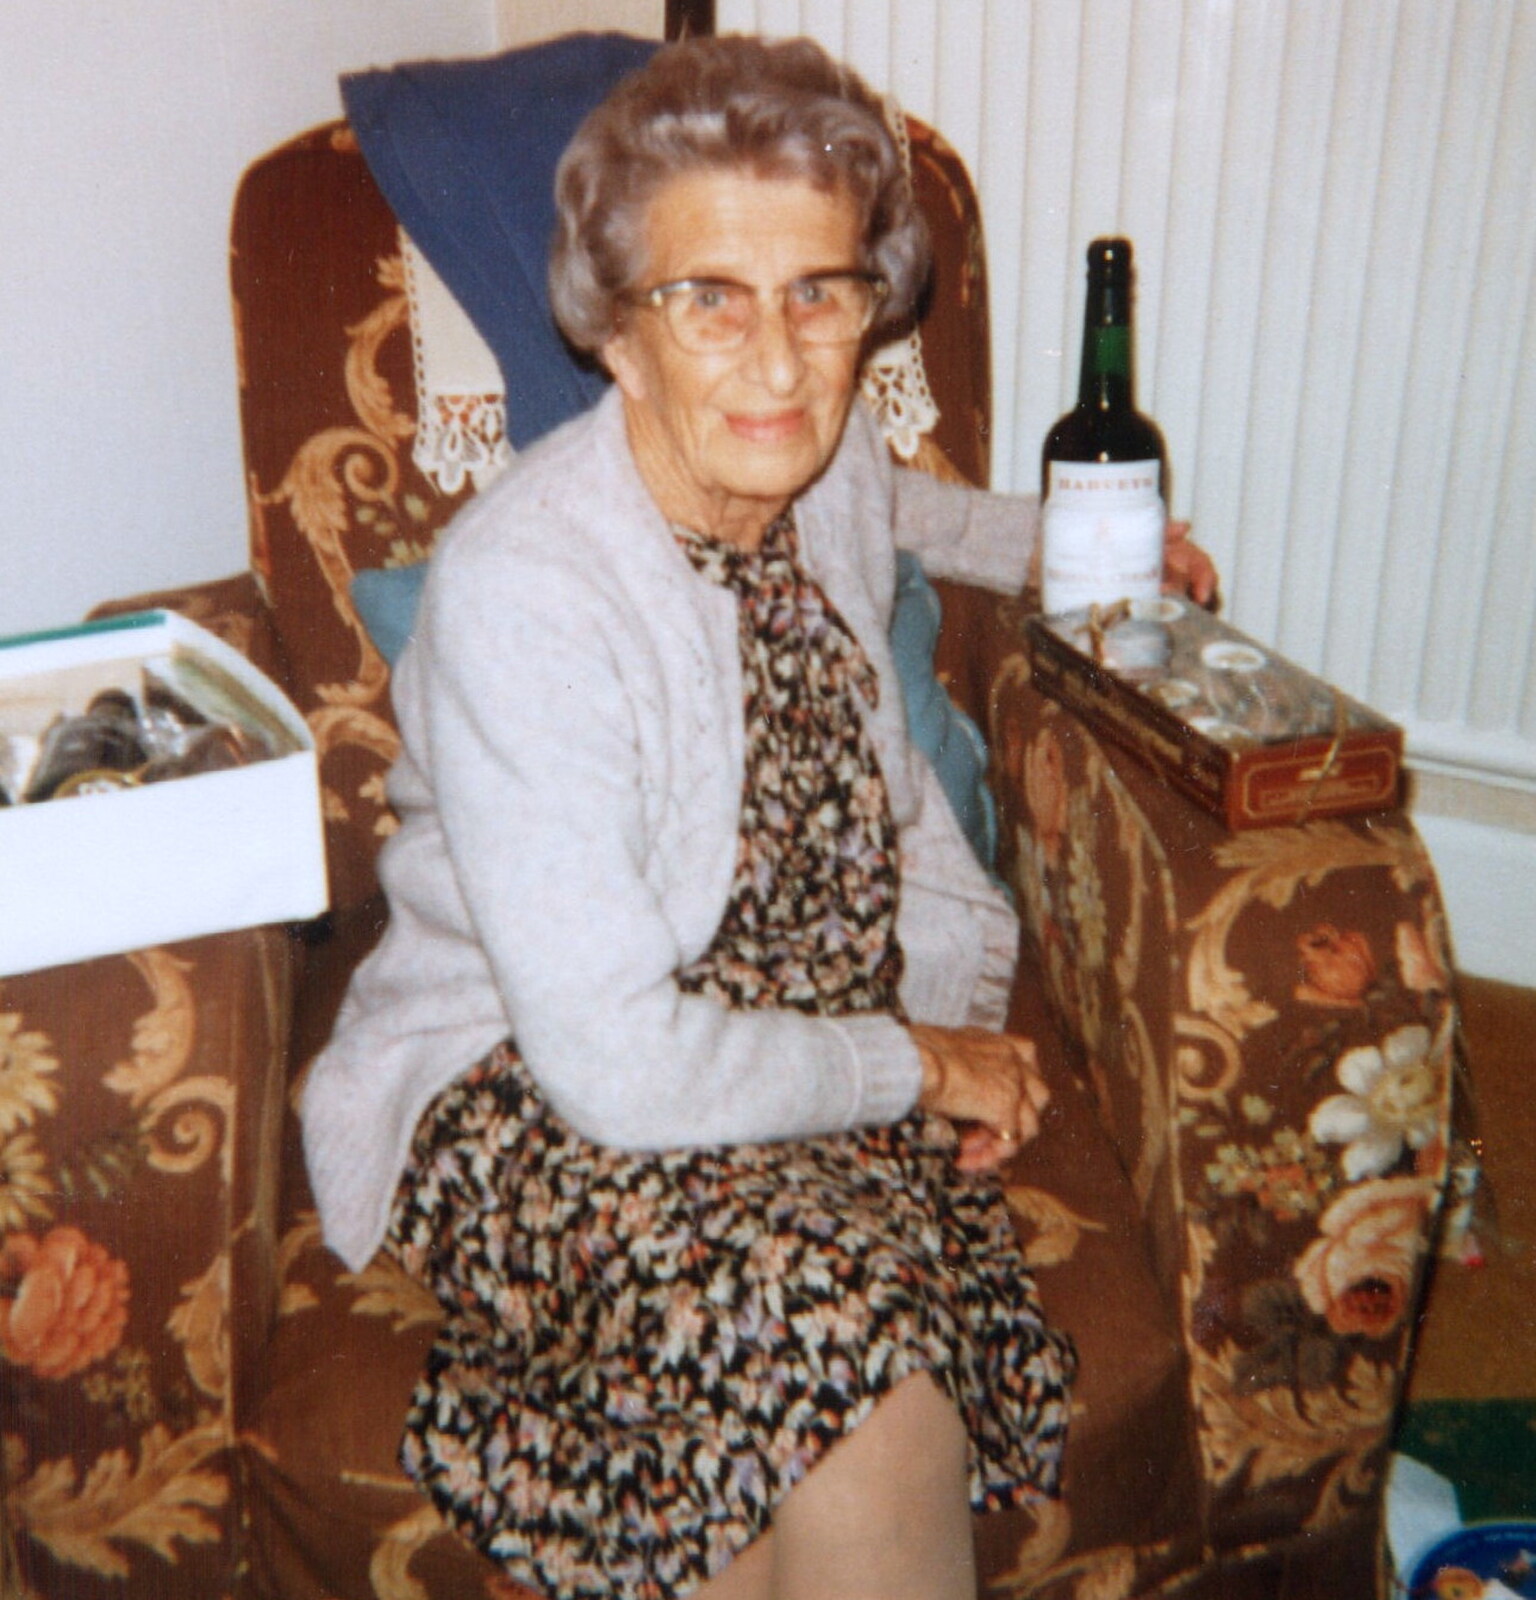 Family History: Danesbury Avenue, Tuckton, Christchurch, Dorset - 24th January 2020: Granny's got the traditional sherry and smellies for Christmas